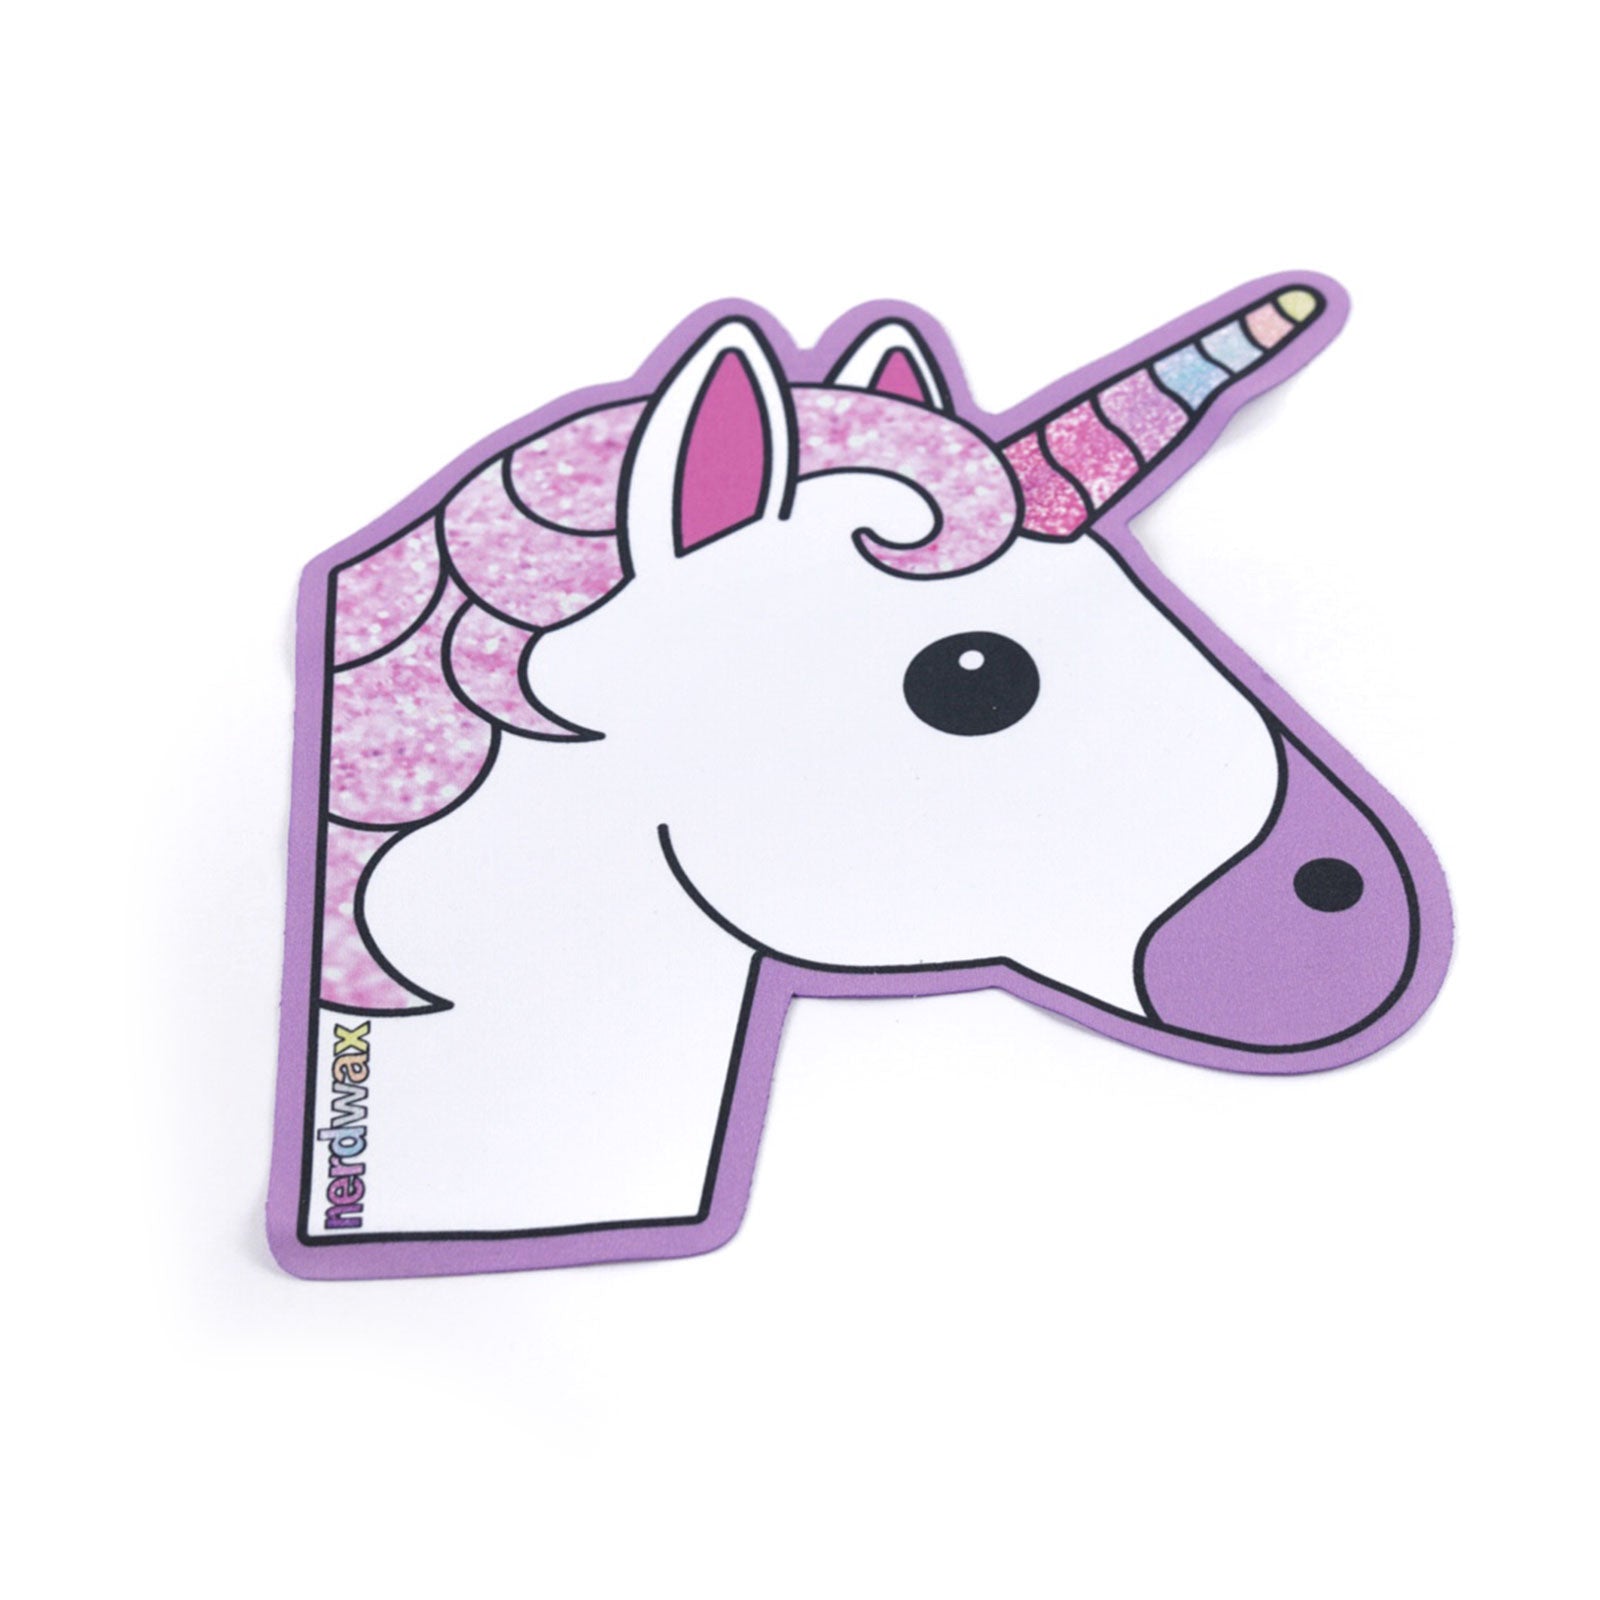 A Unicorn You Can Clean Your Glasses With